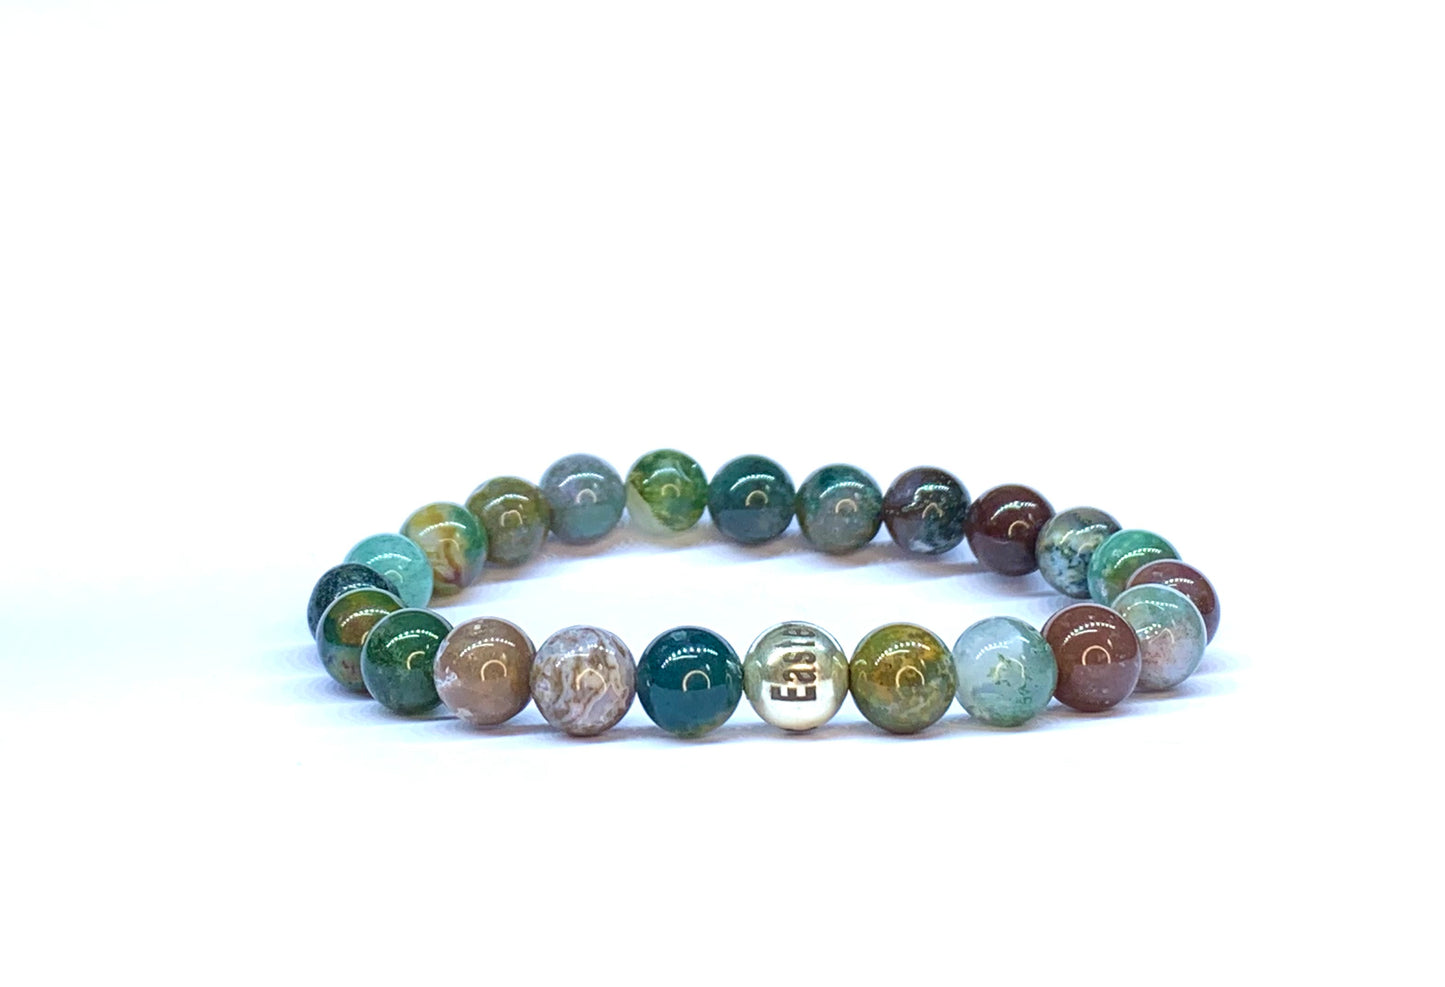 Green Indian Agate bead bracelet, with Eastern Adornment branded silver bead